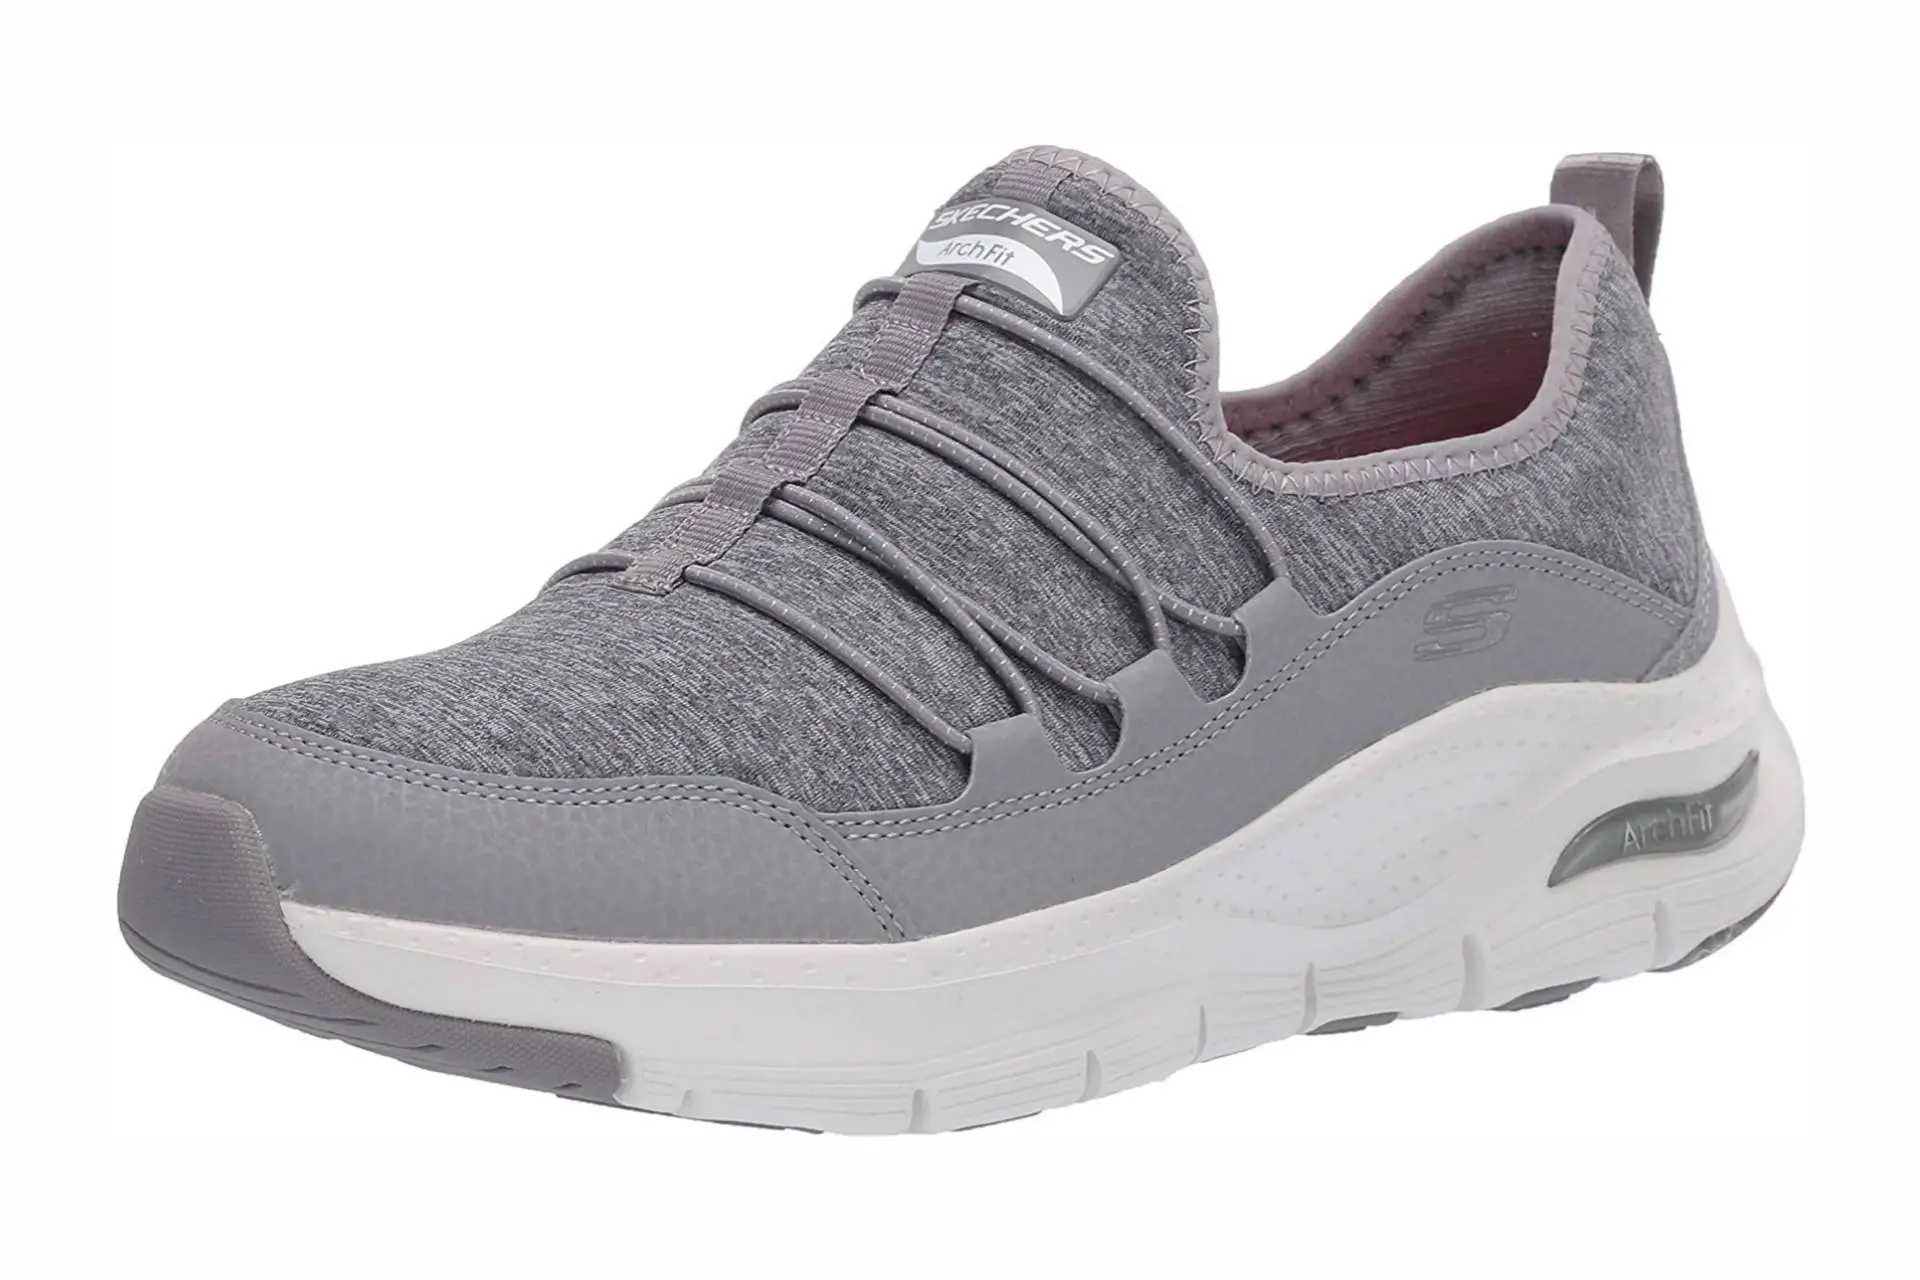 Best skechers Sneakers for arch support